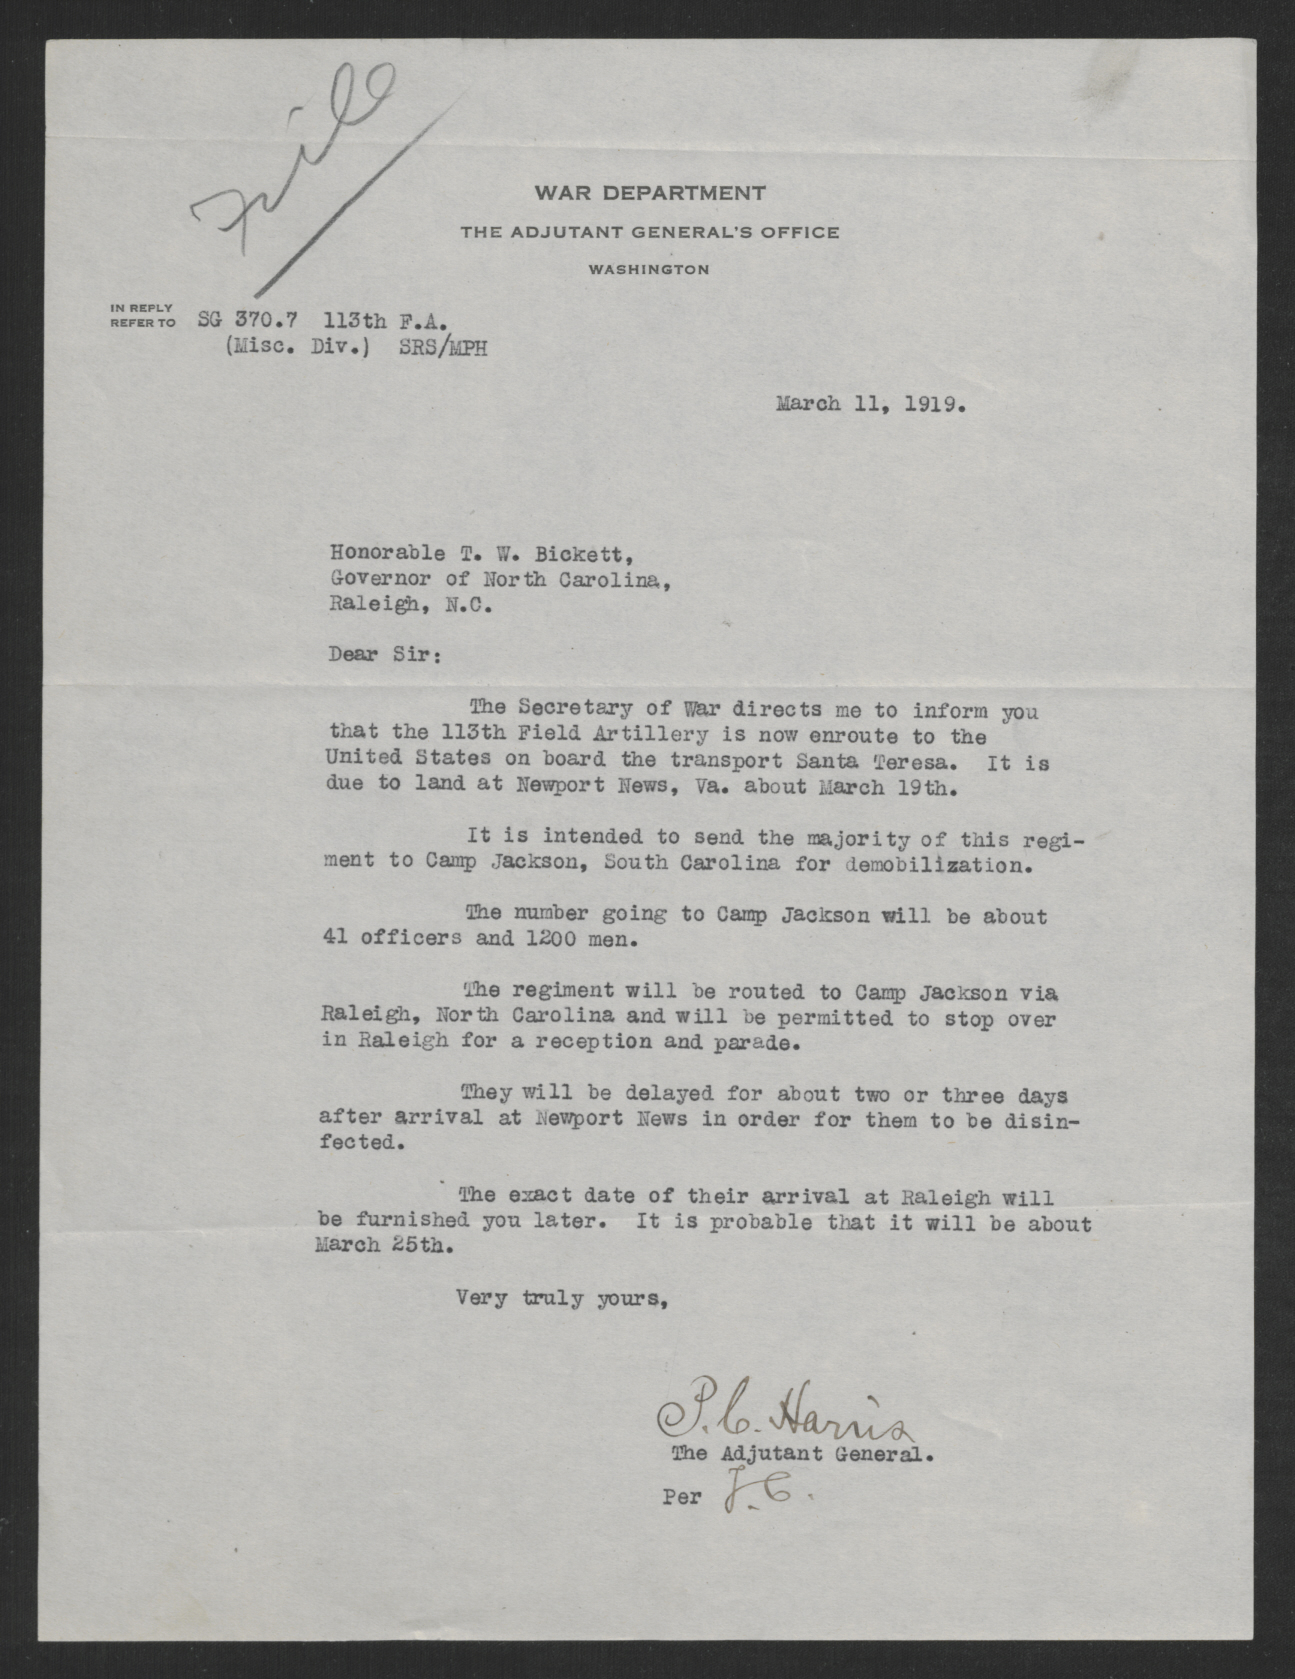 Letter from Peter C. Harris to Thomas W. Bickett, March 11, 1919